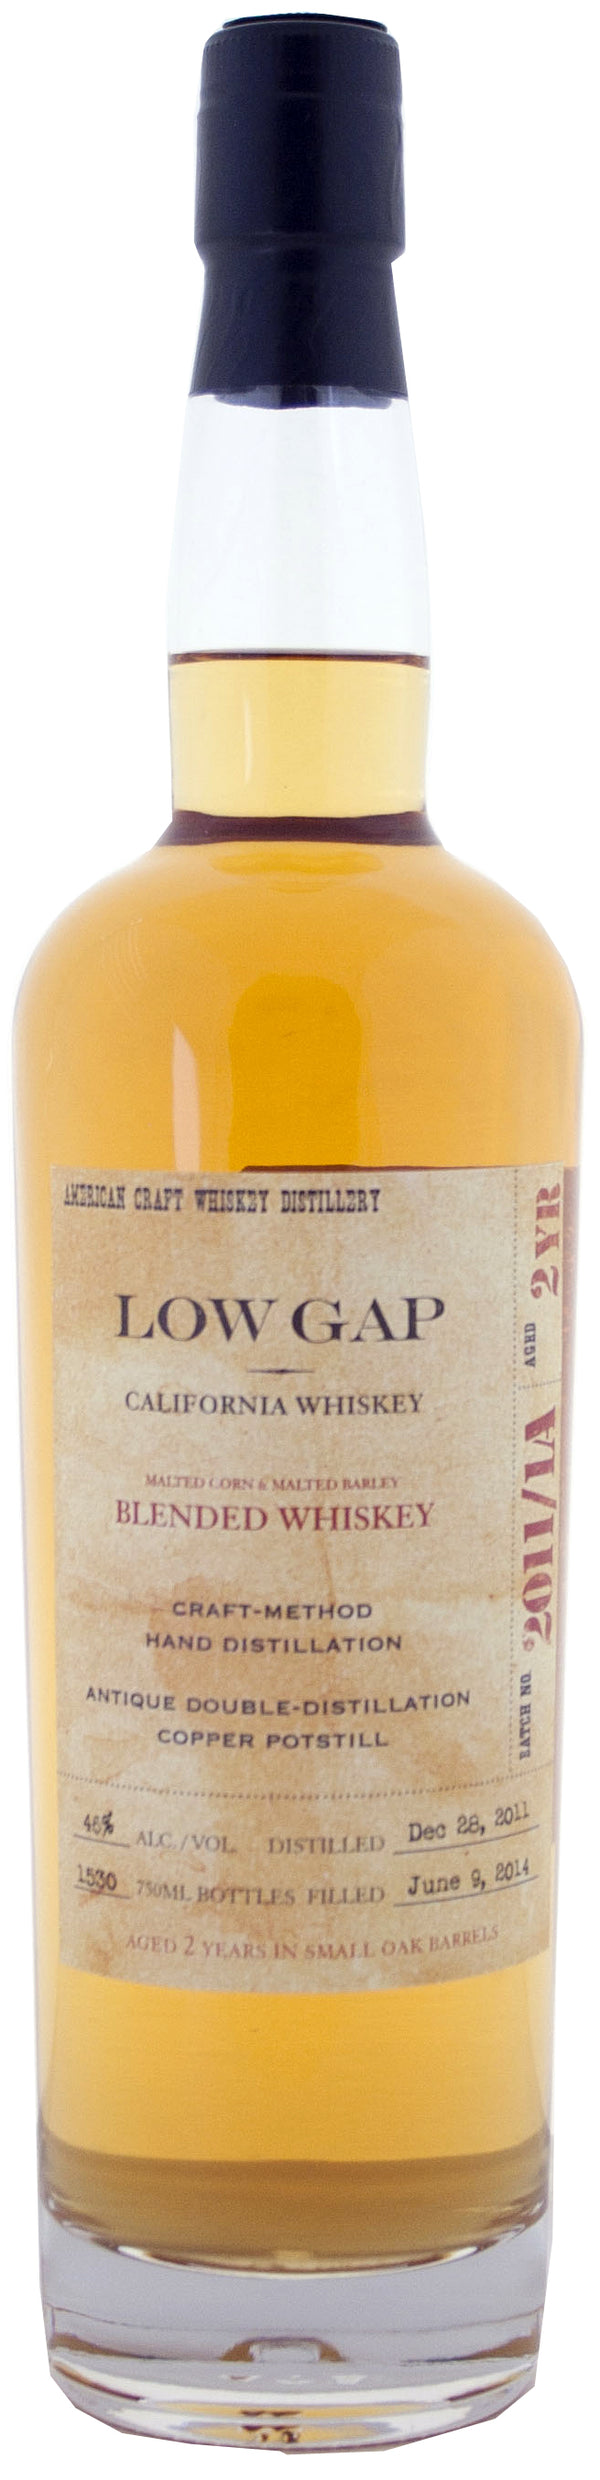 Low Gap Blended Whiskey 3 Year Old 750ml